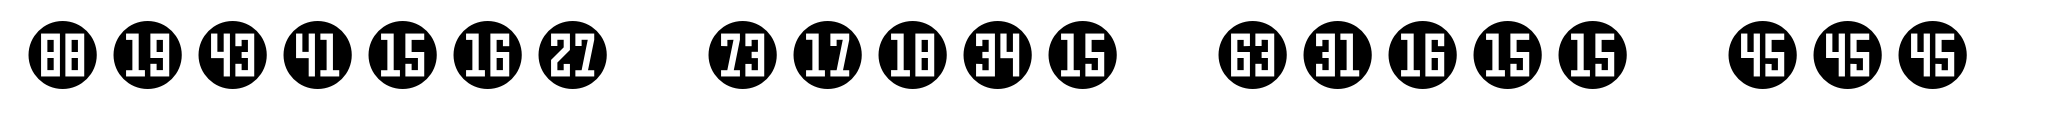 Numbers Style Three Numbers Style Three Circle Negative image